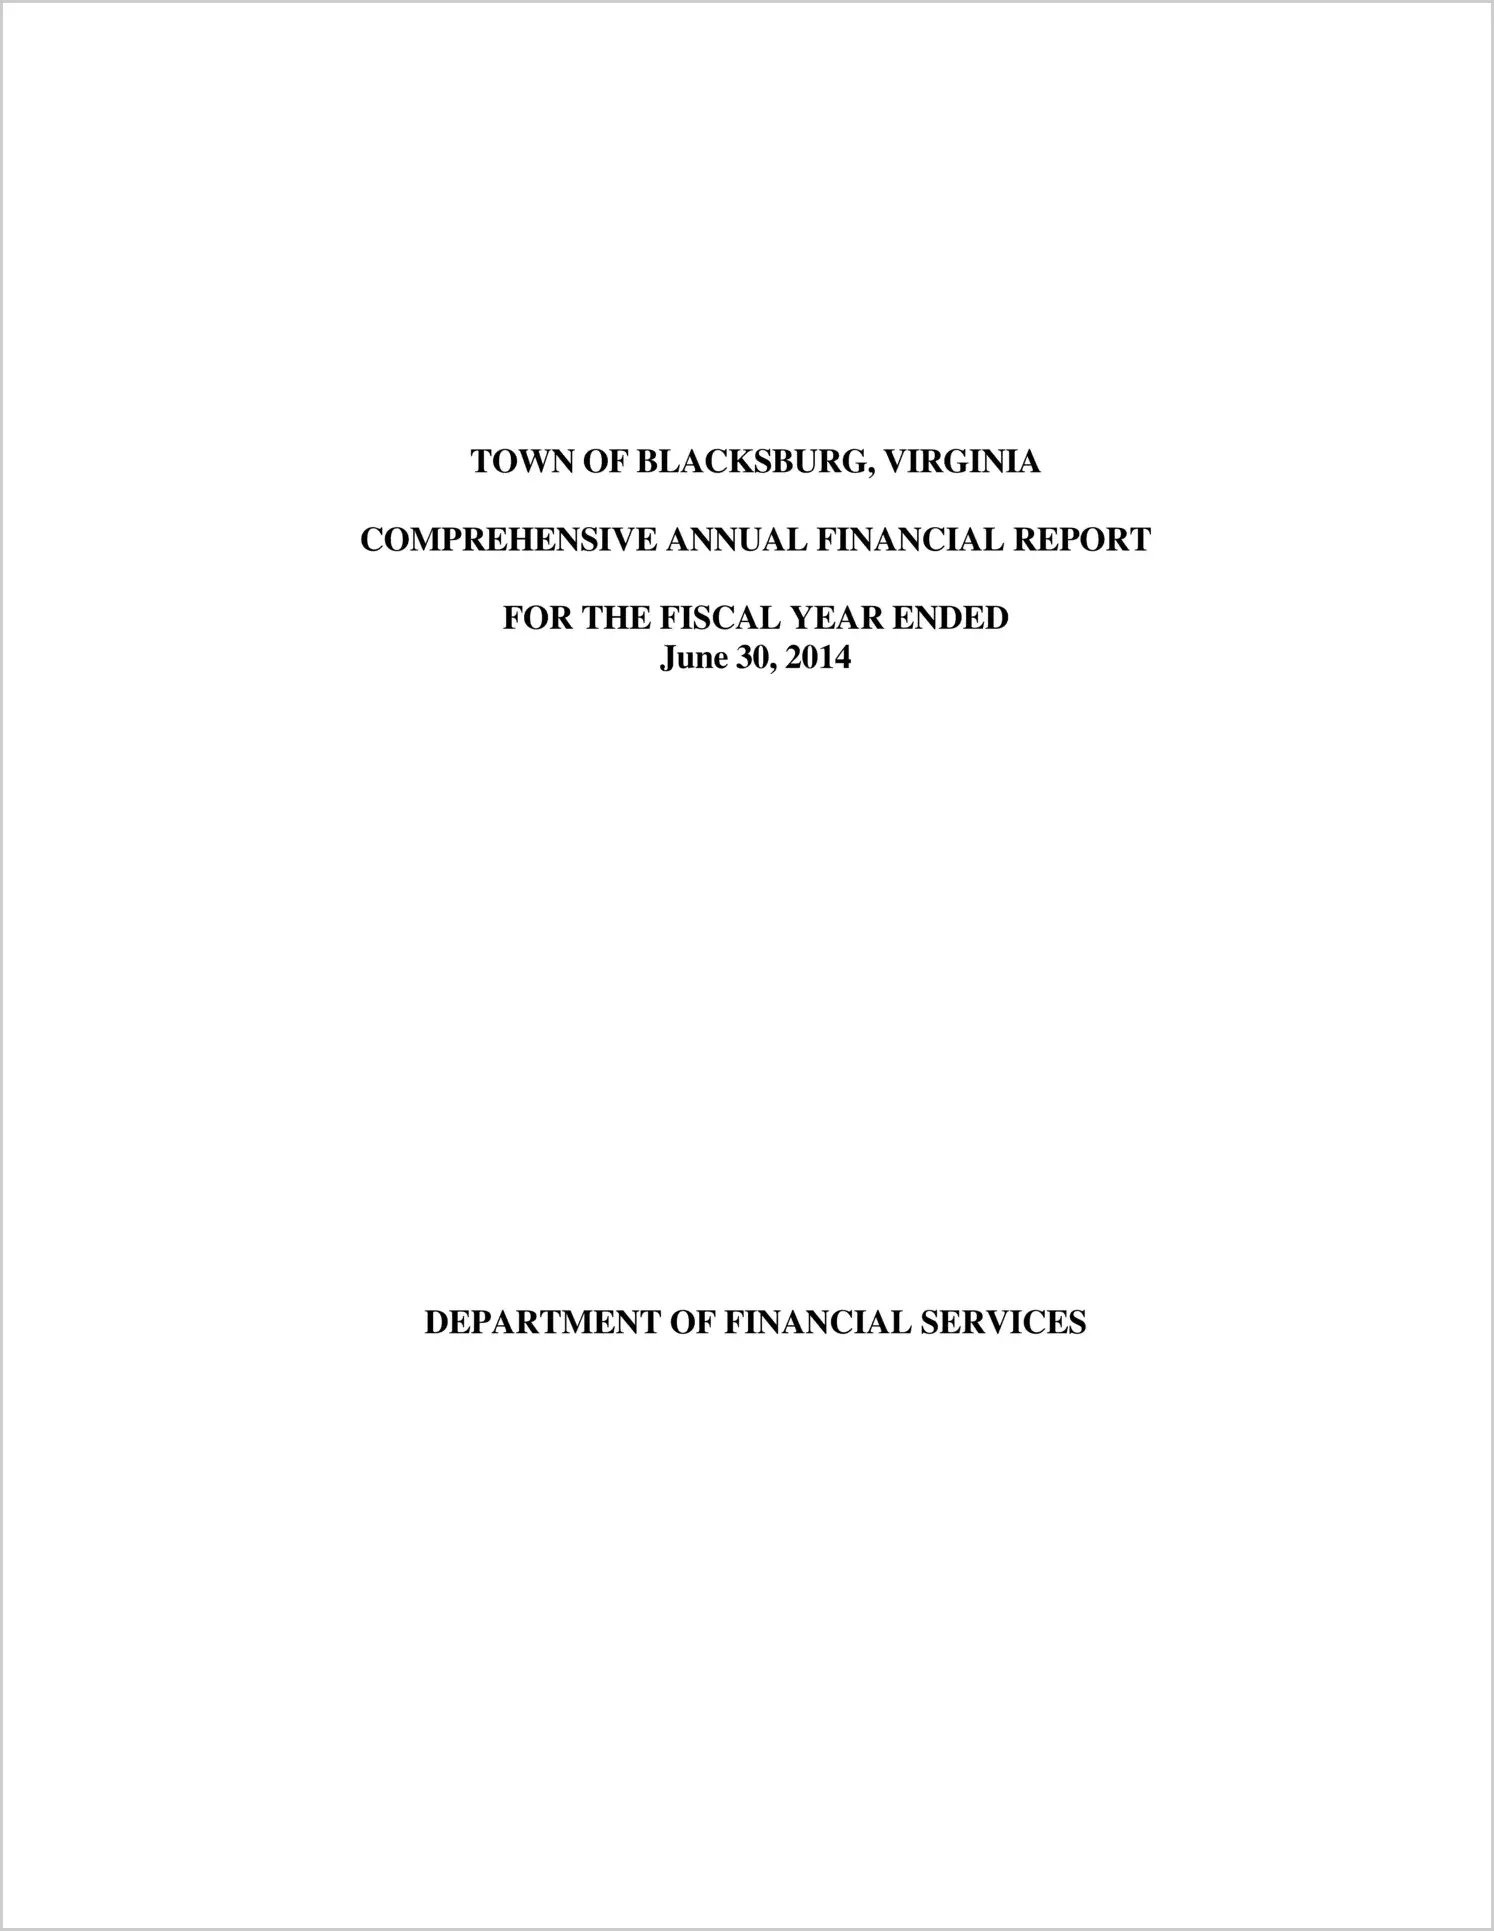 2014 Annual Financial Report for Town of Blacksburg